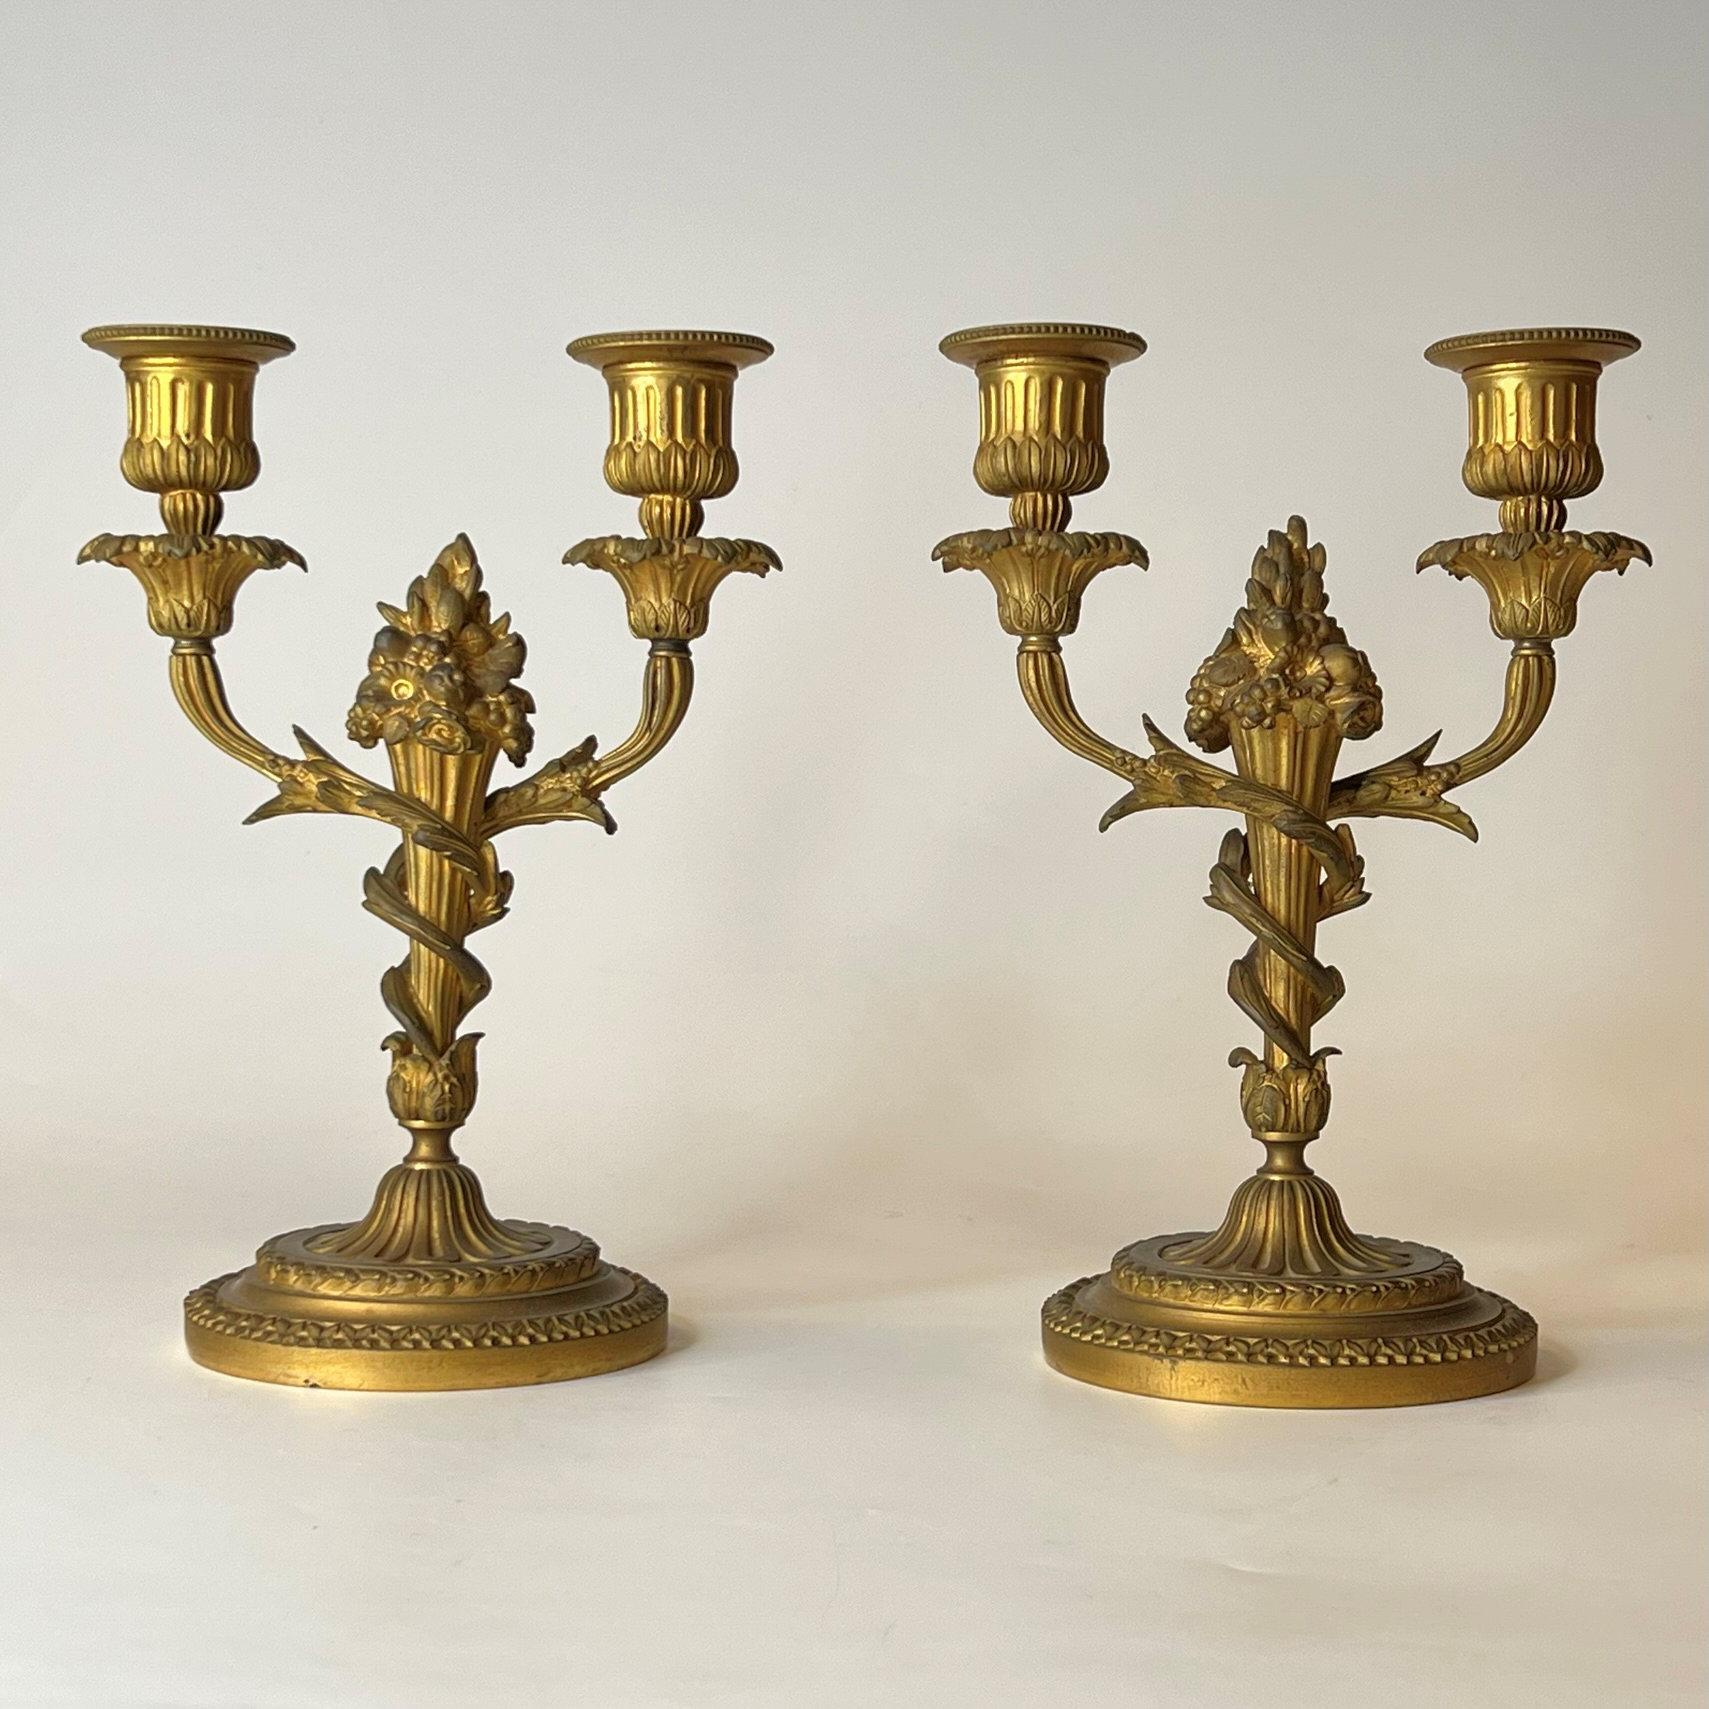 Pair of antique (19th century) gilt bronze two-light candelabra in the Louis XVI style.